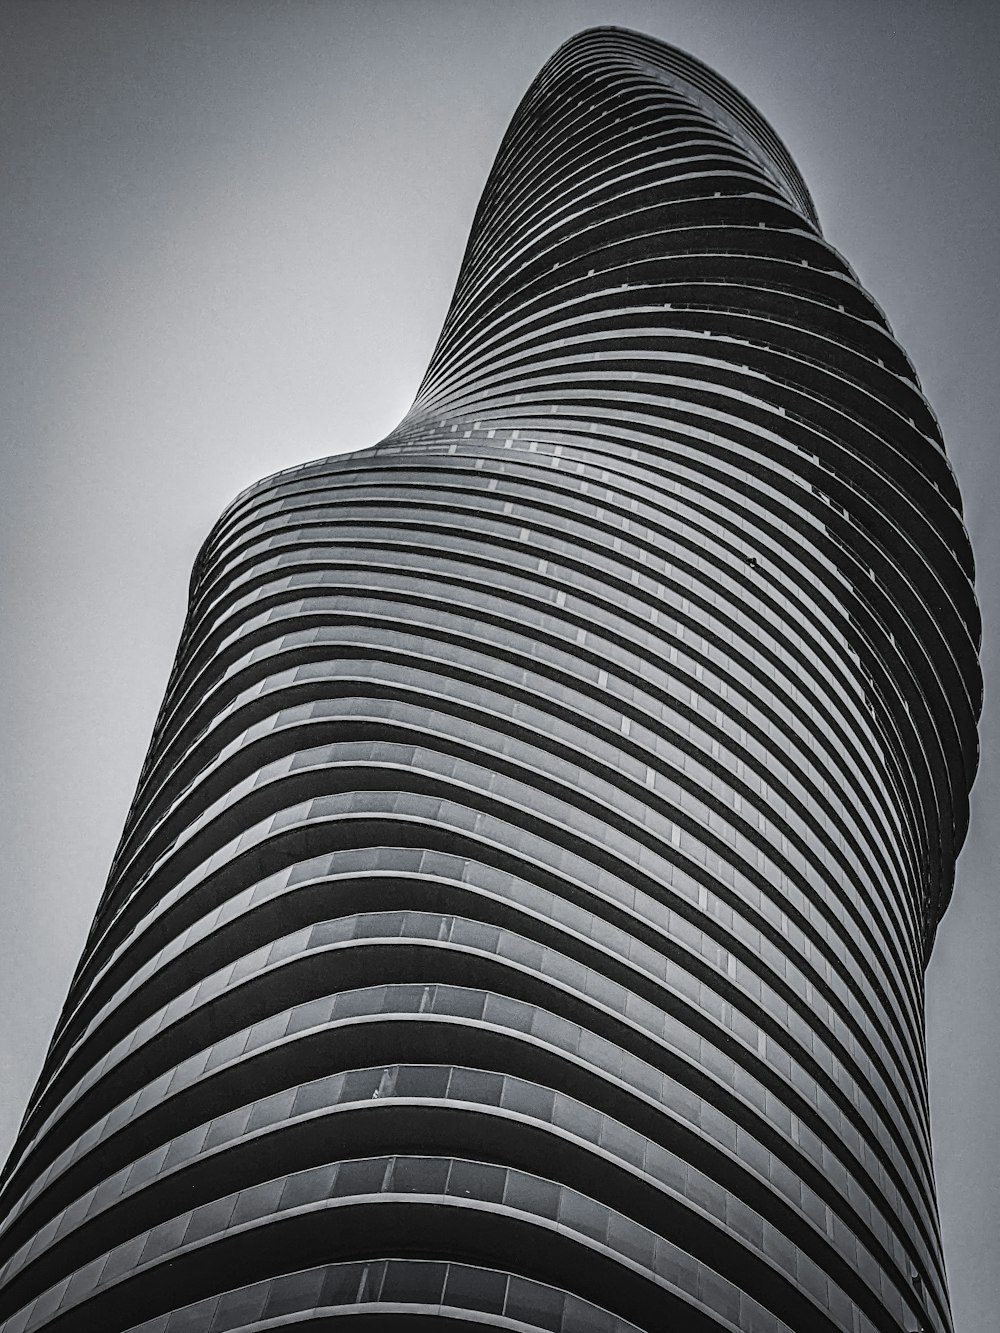 a close-up of a tall building